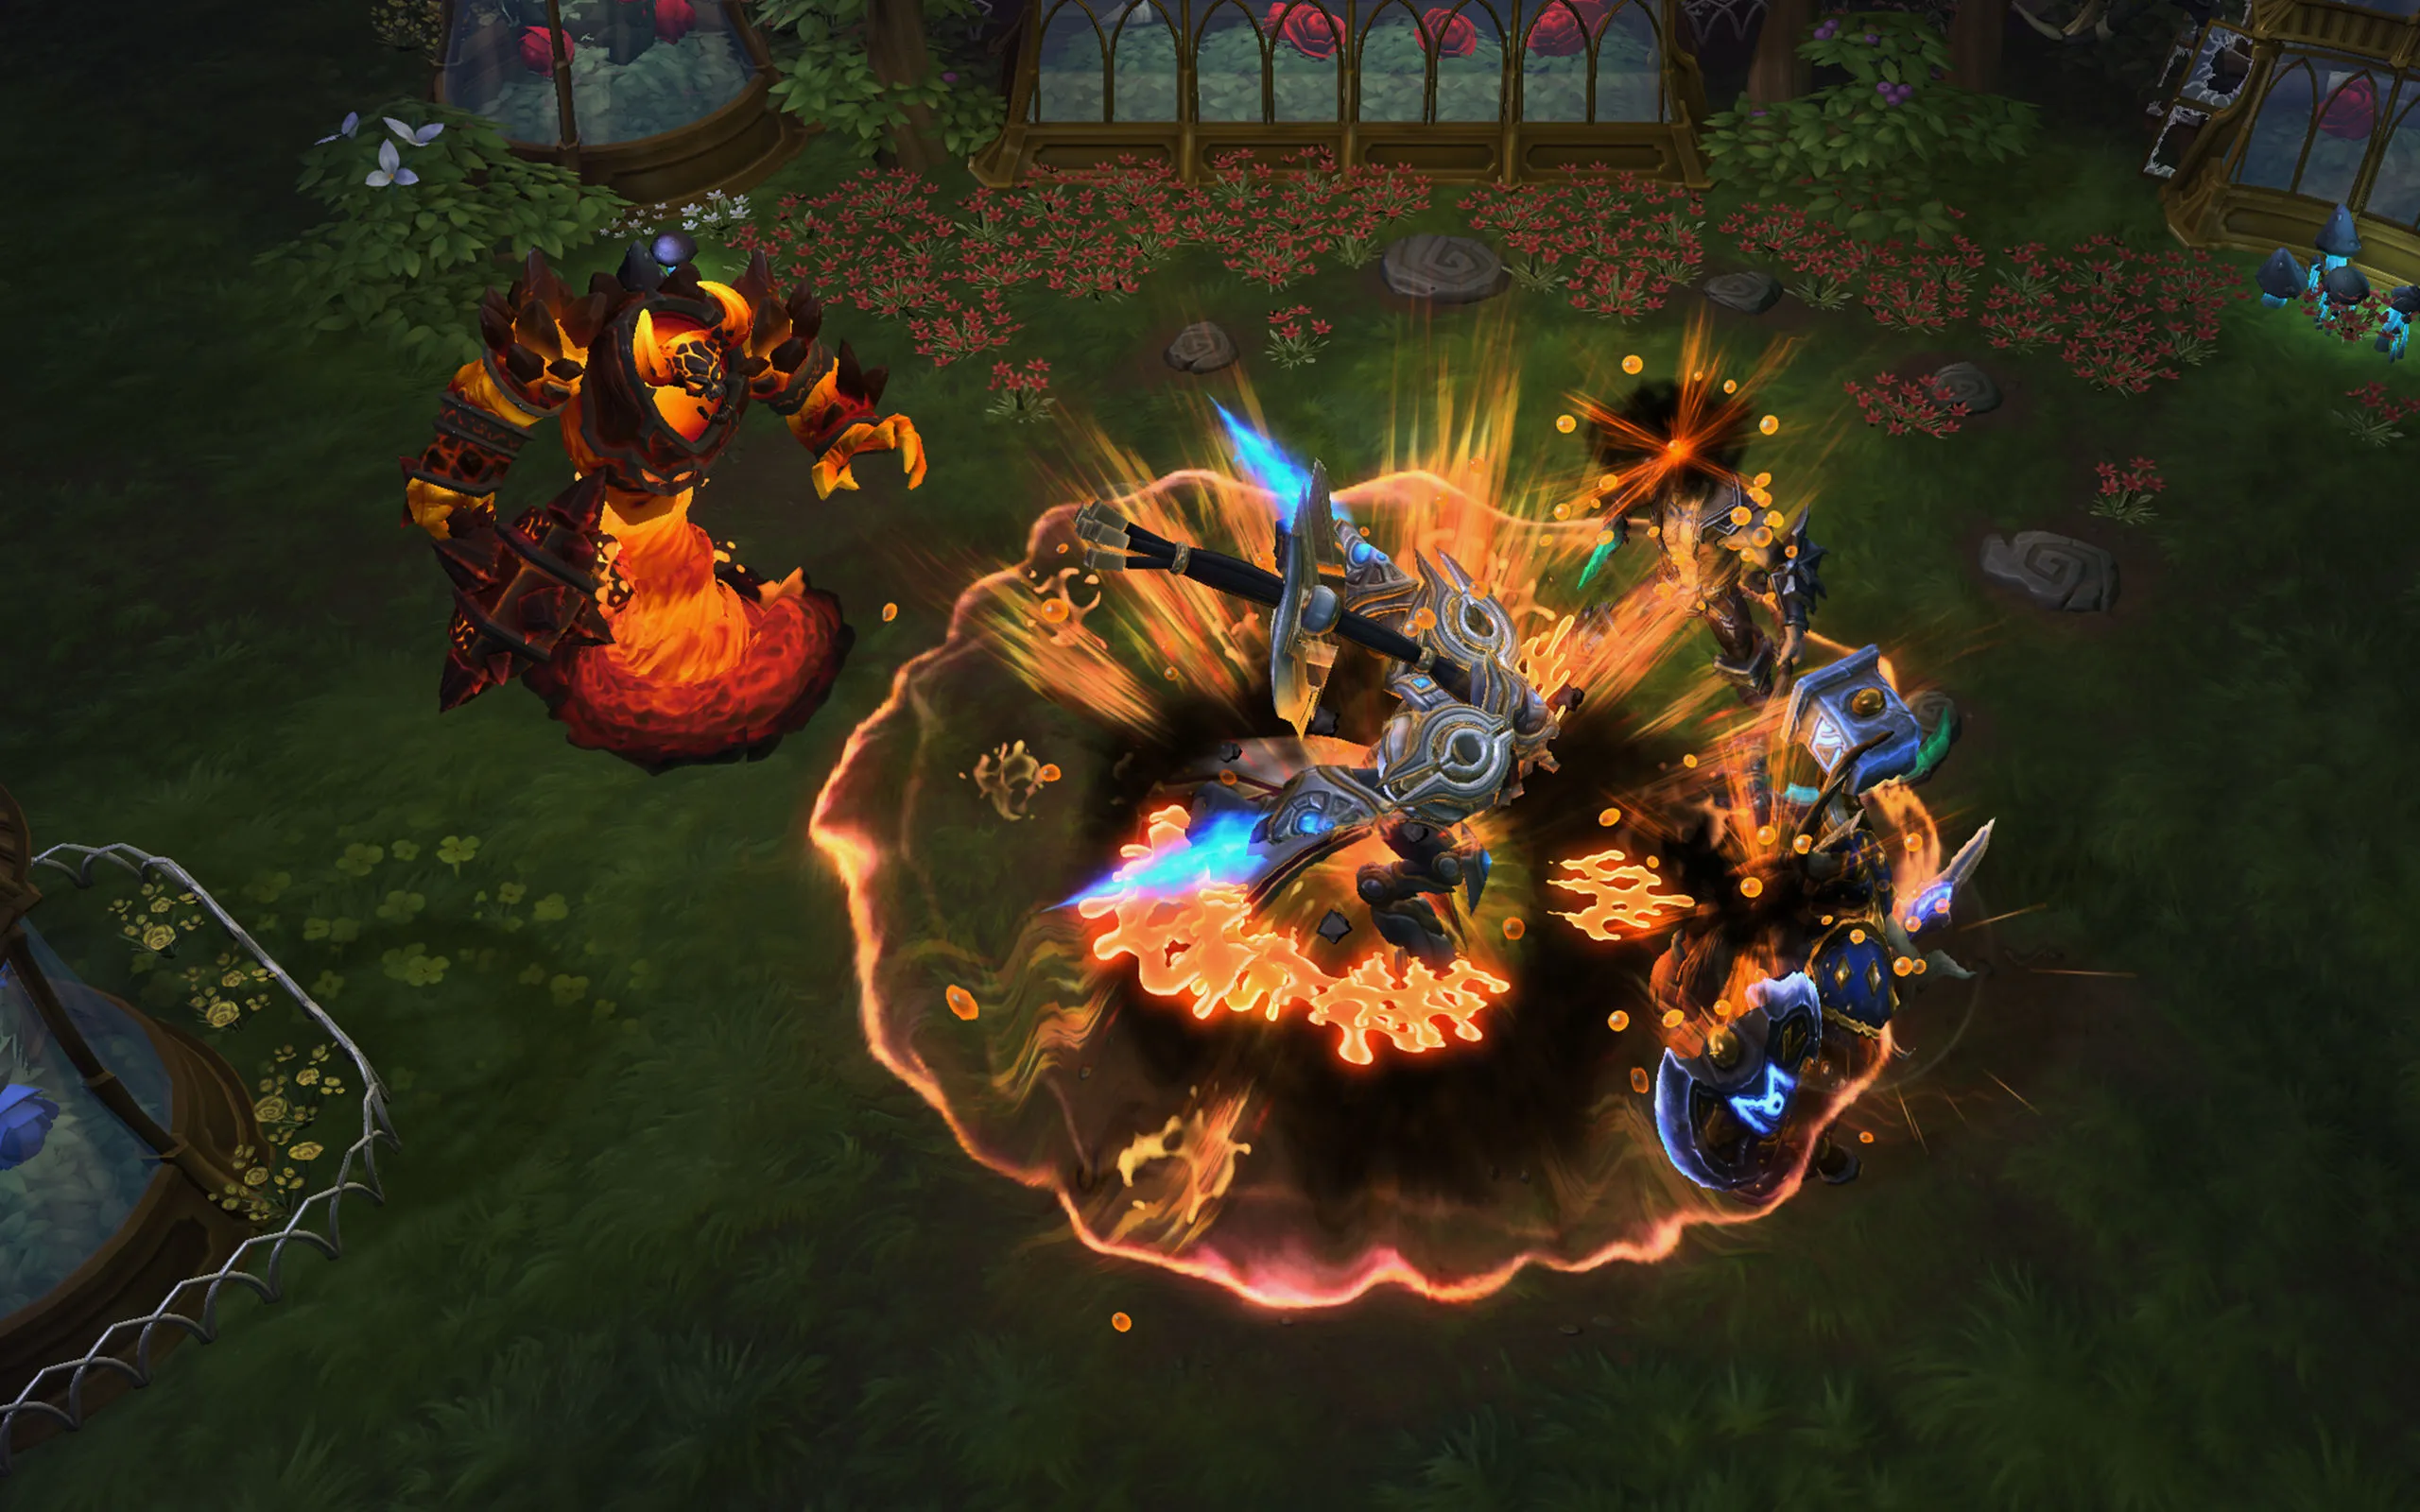 Heroes of the Storm is getting a massive update and a new hero